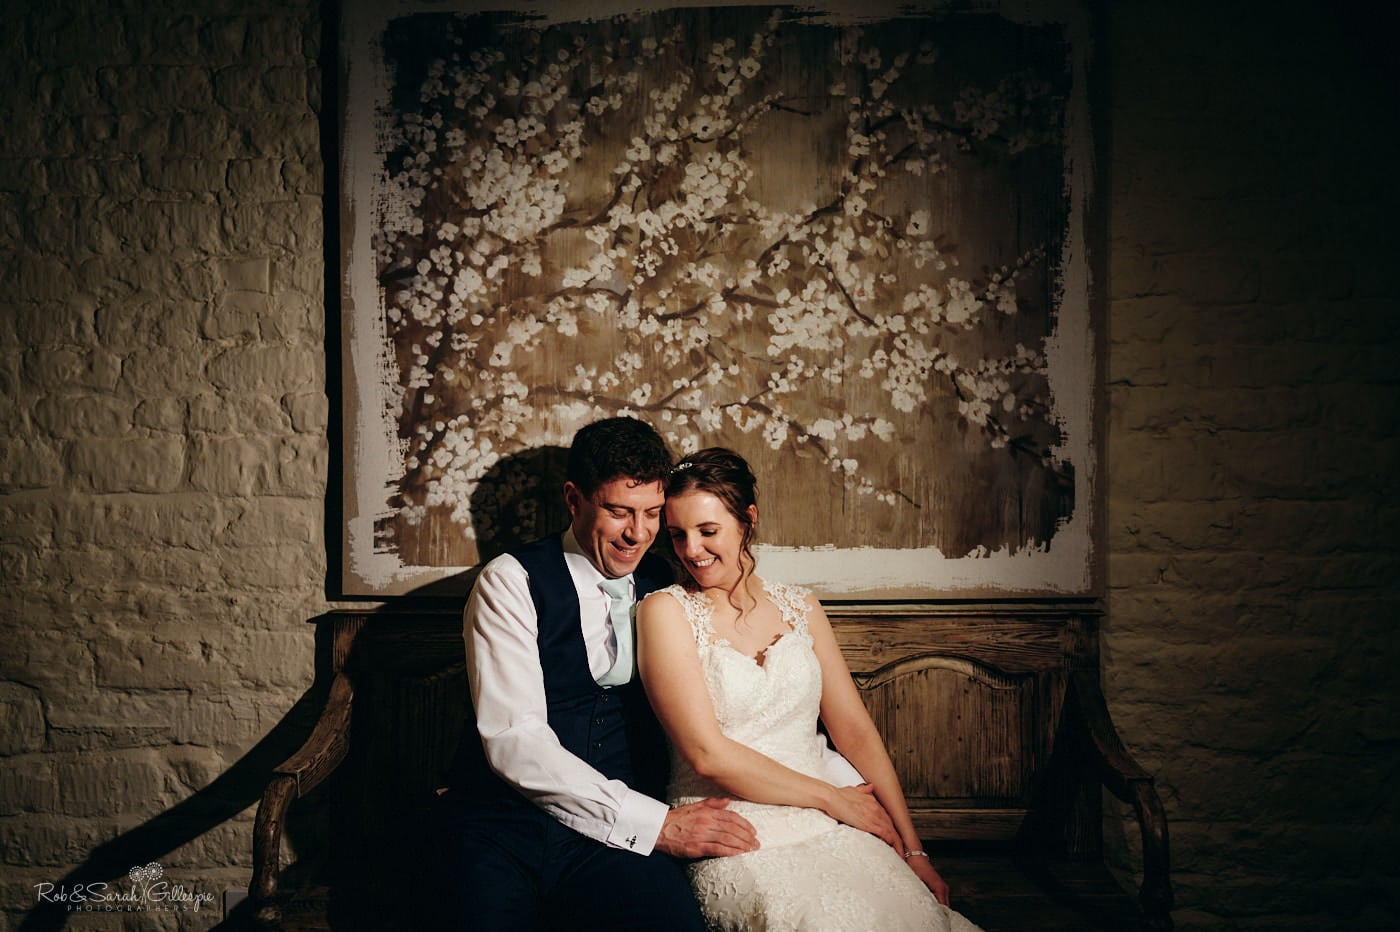 Bride and groom seated together in beautiful barn venue